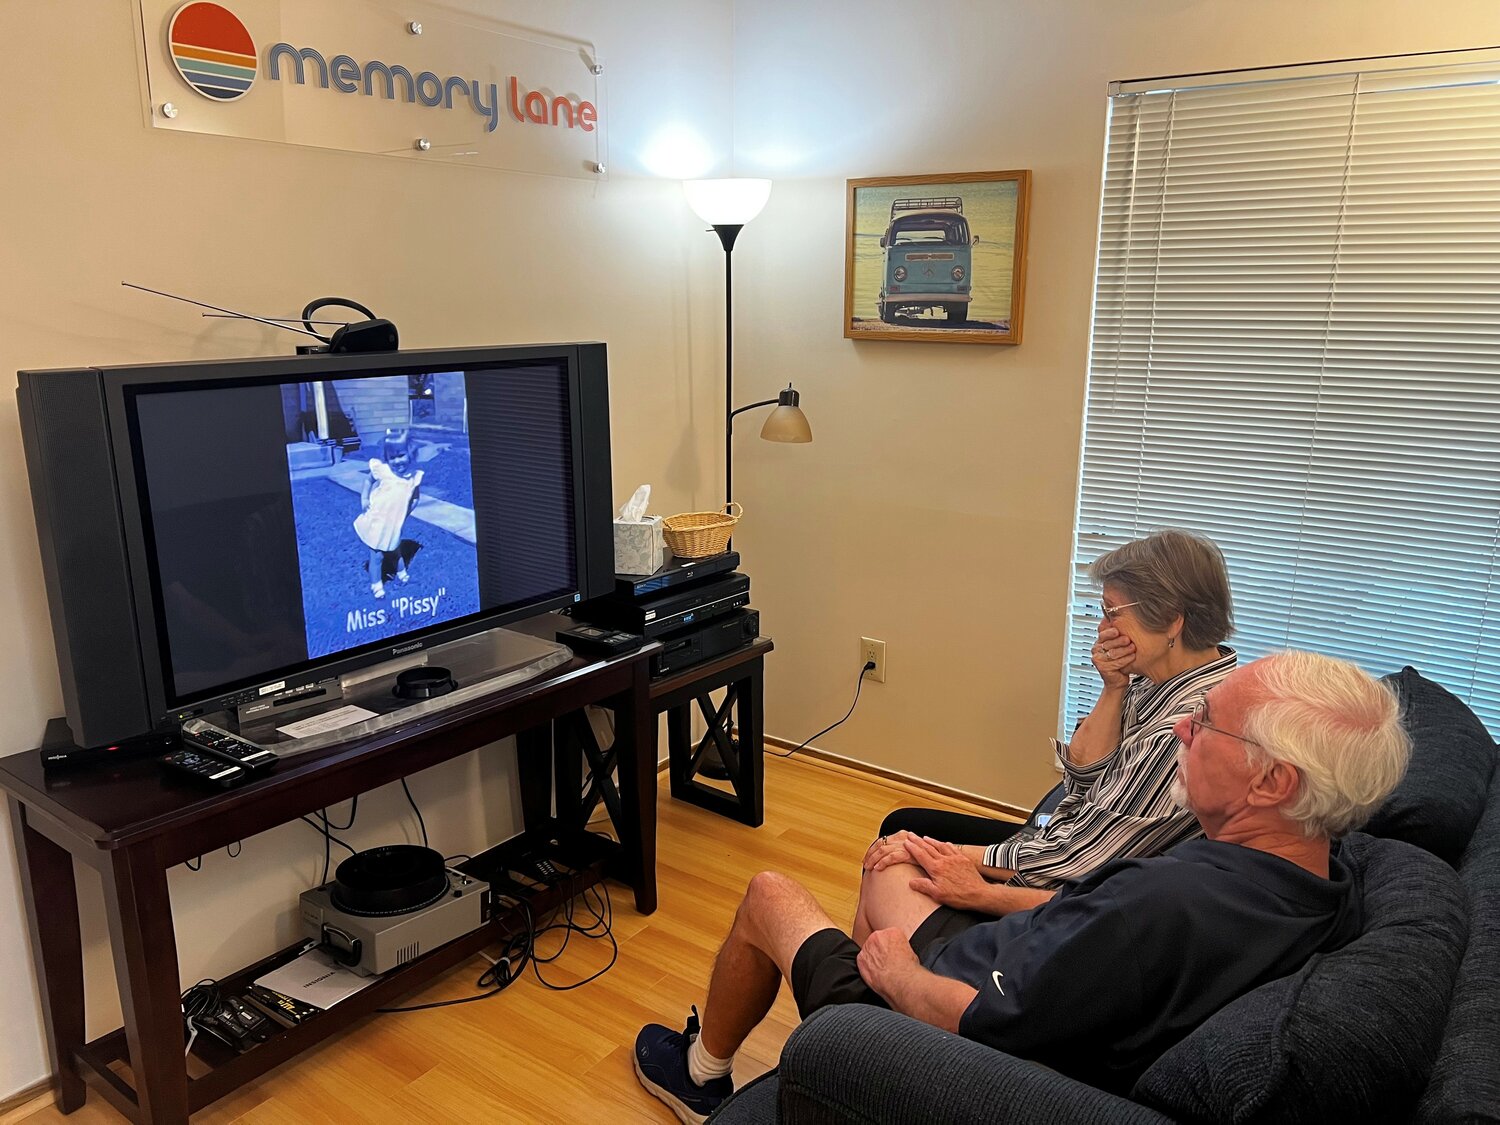 Customers relax in Memory Lane’s preview room to review video they recorded many years prior